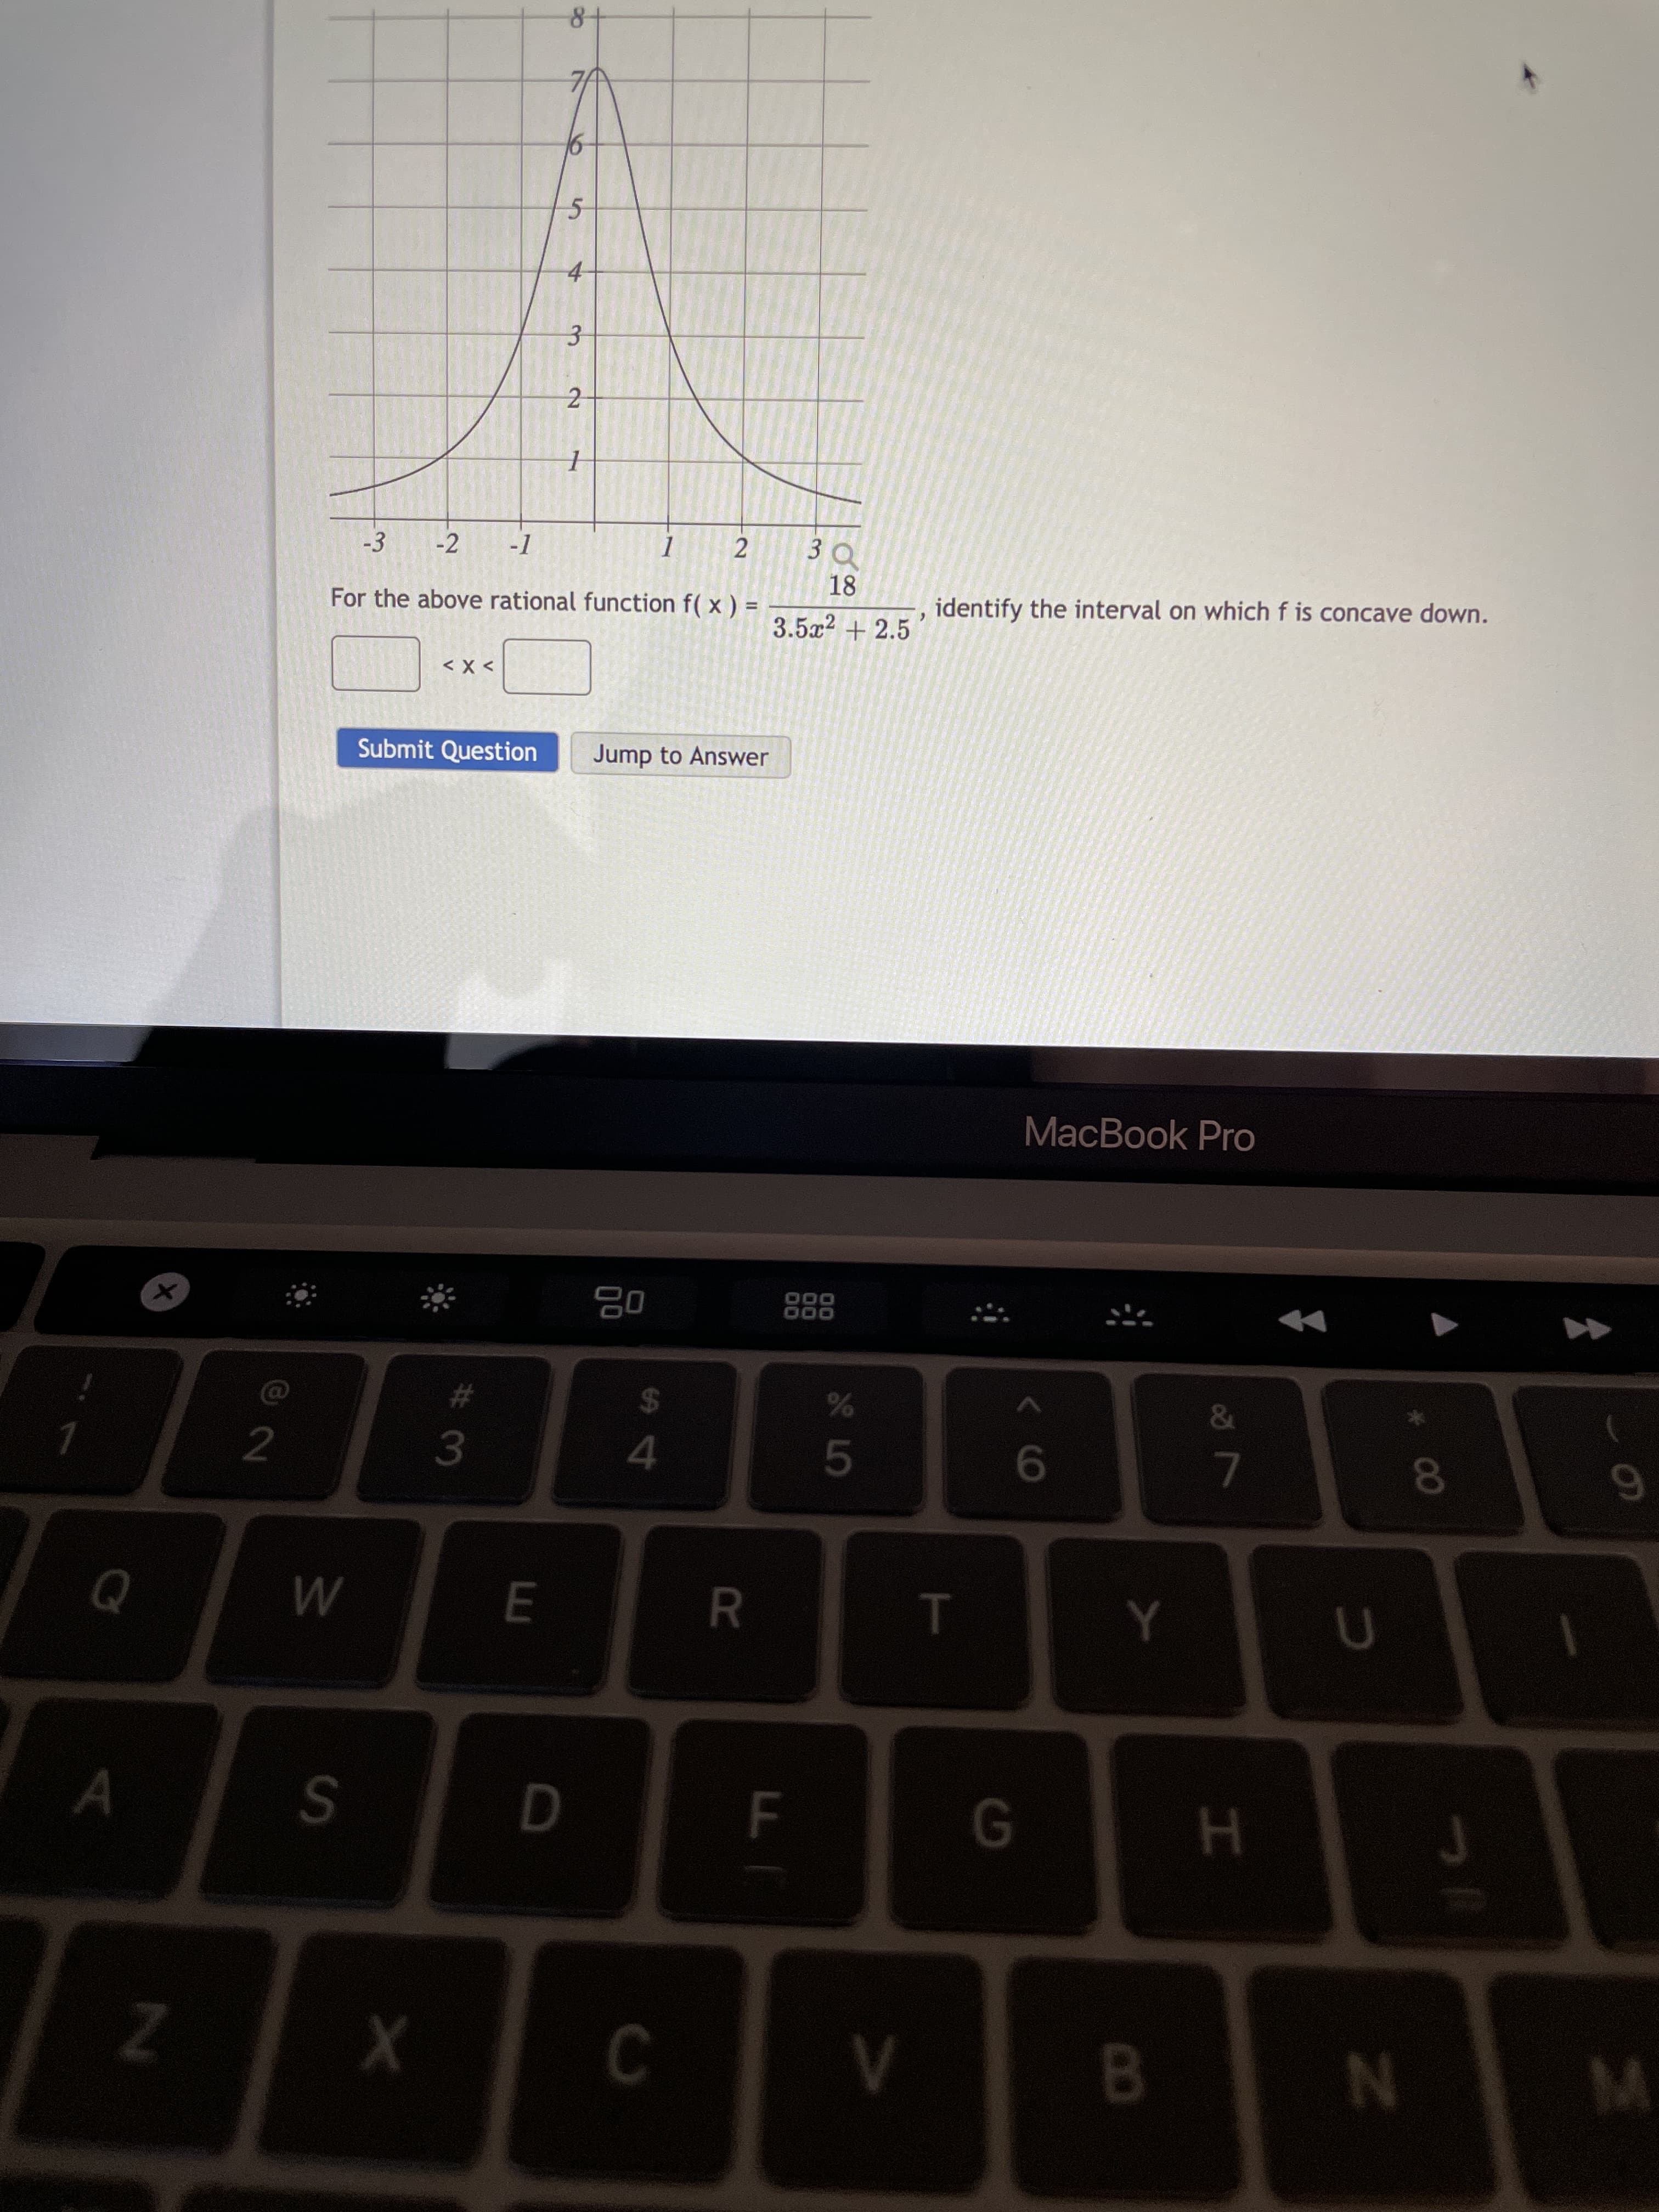 00
T
5
FI
R
2.
S4
3.
2.
W/
SI
Z.
8-
7A
-3
-2
3Q
18
For the above rational function f( x ) =
identify the interval on which f is concave down.
3.5x² + 2.5
> X >
Submit Question
Jump to Answer
MacBook Pro
000
000
%24
2
3.
9.
7.
A
D.
H.
8.
